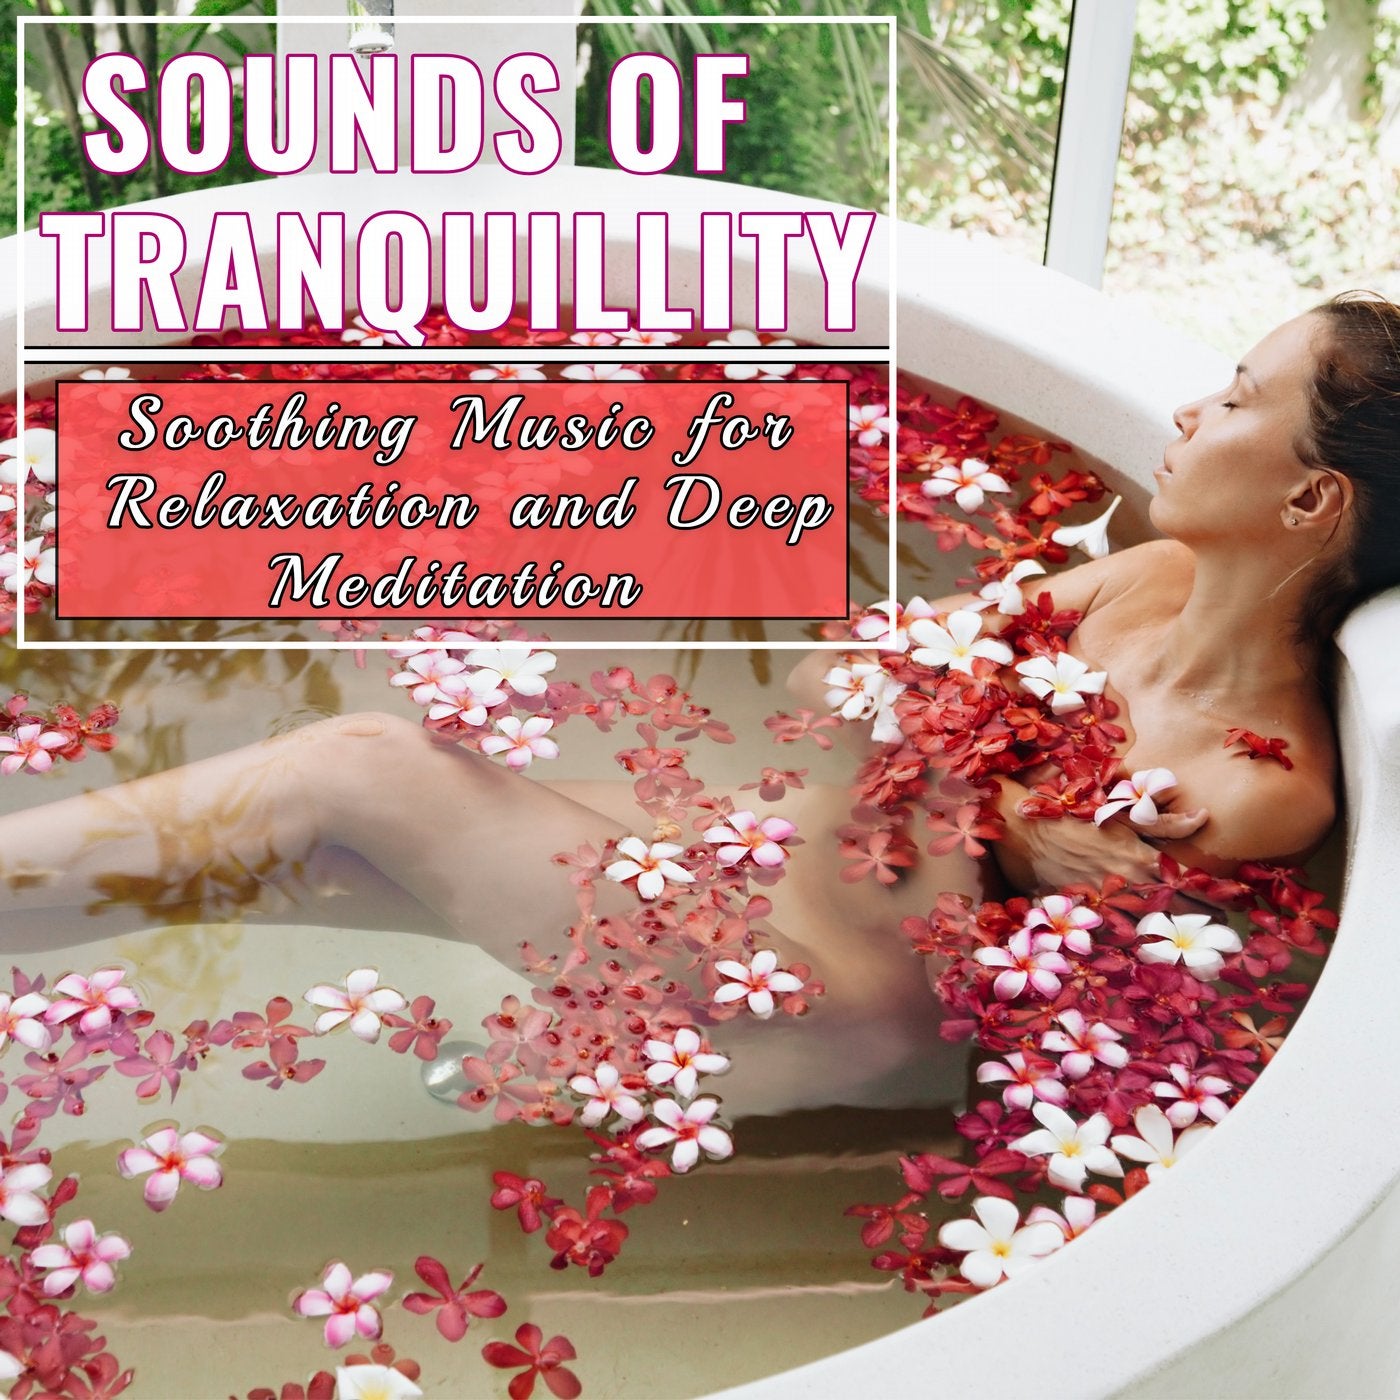 Sounds of Tranquillity: Soothing Music for Relaxation and Deep Meditation